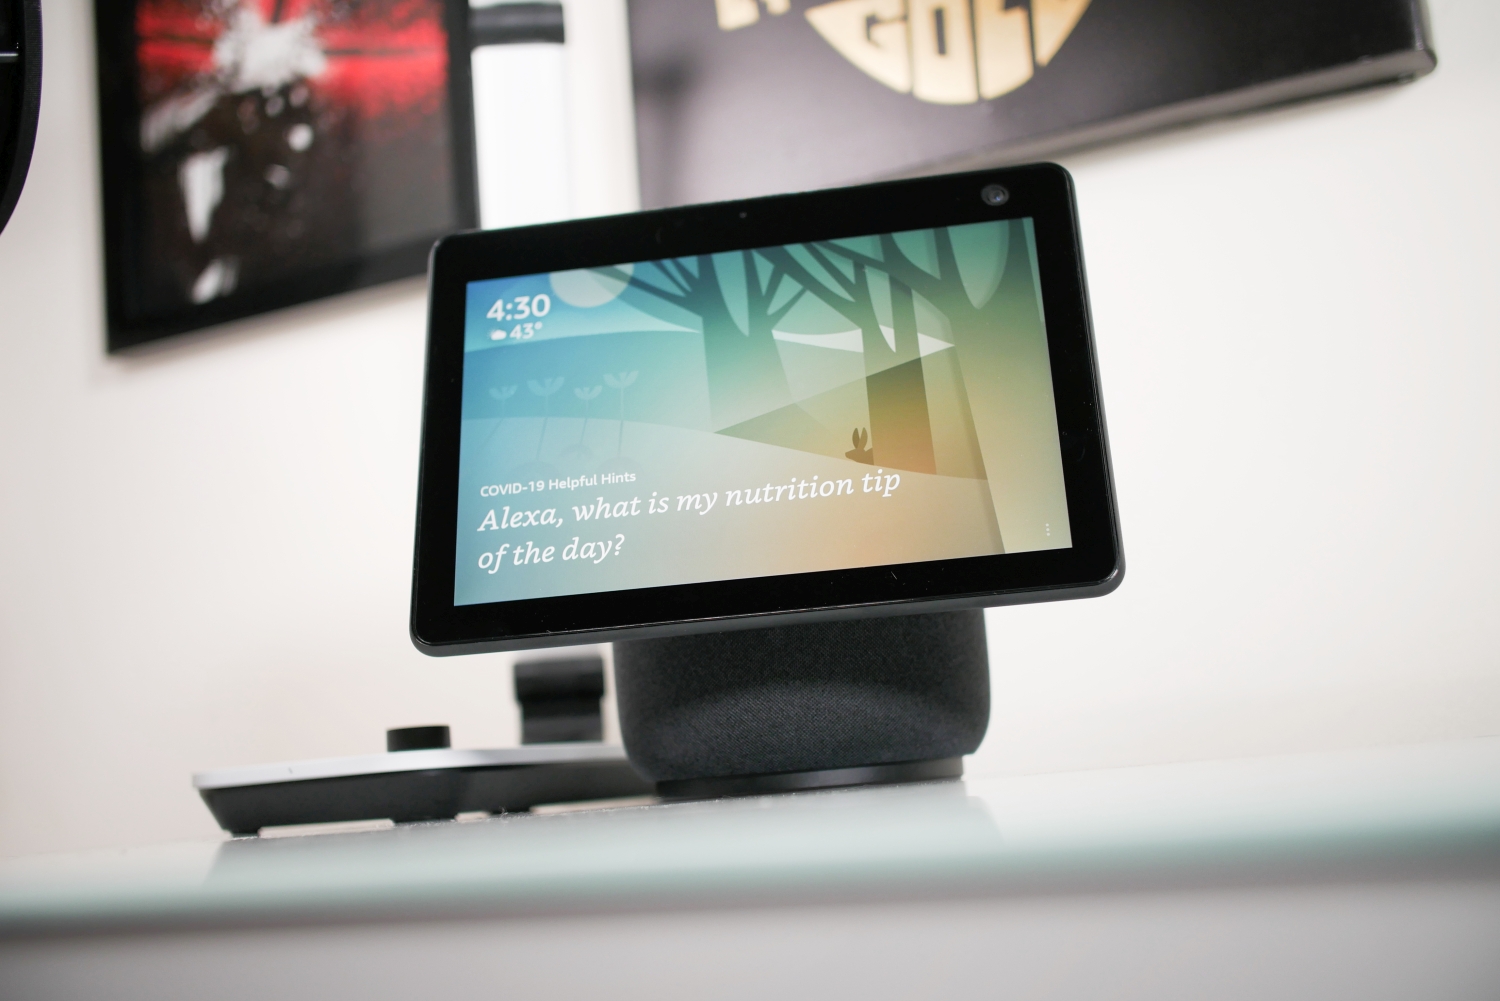 Get the Latest Echo Show 8 for Its Lowest Price Ever at  Right Now